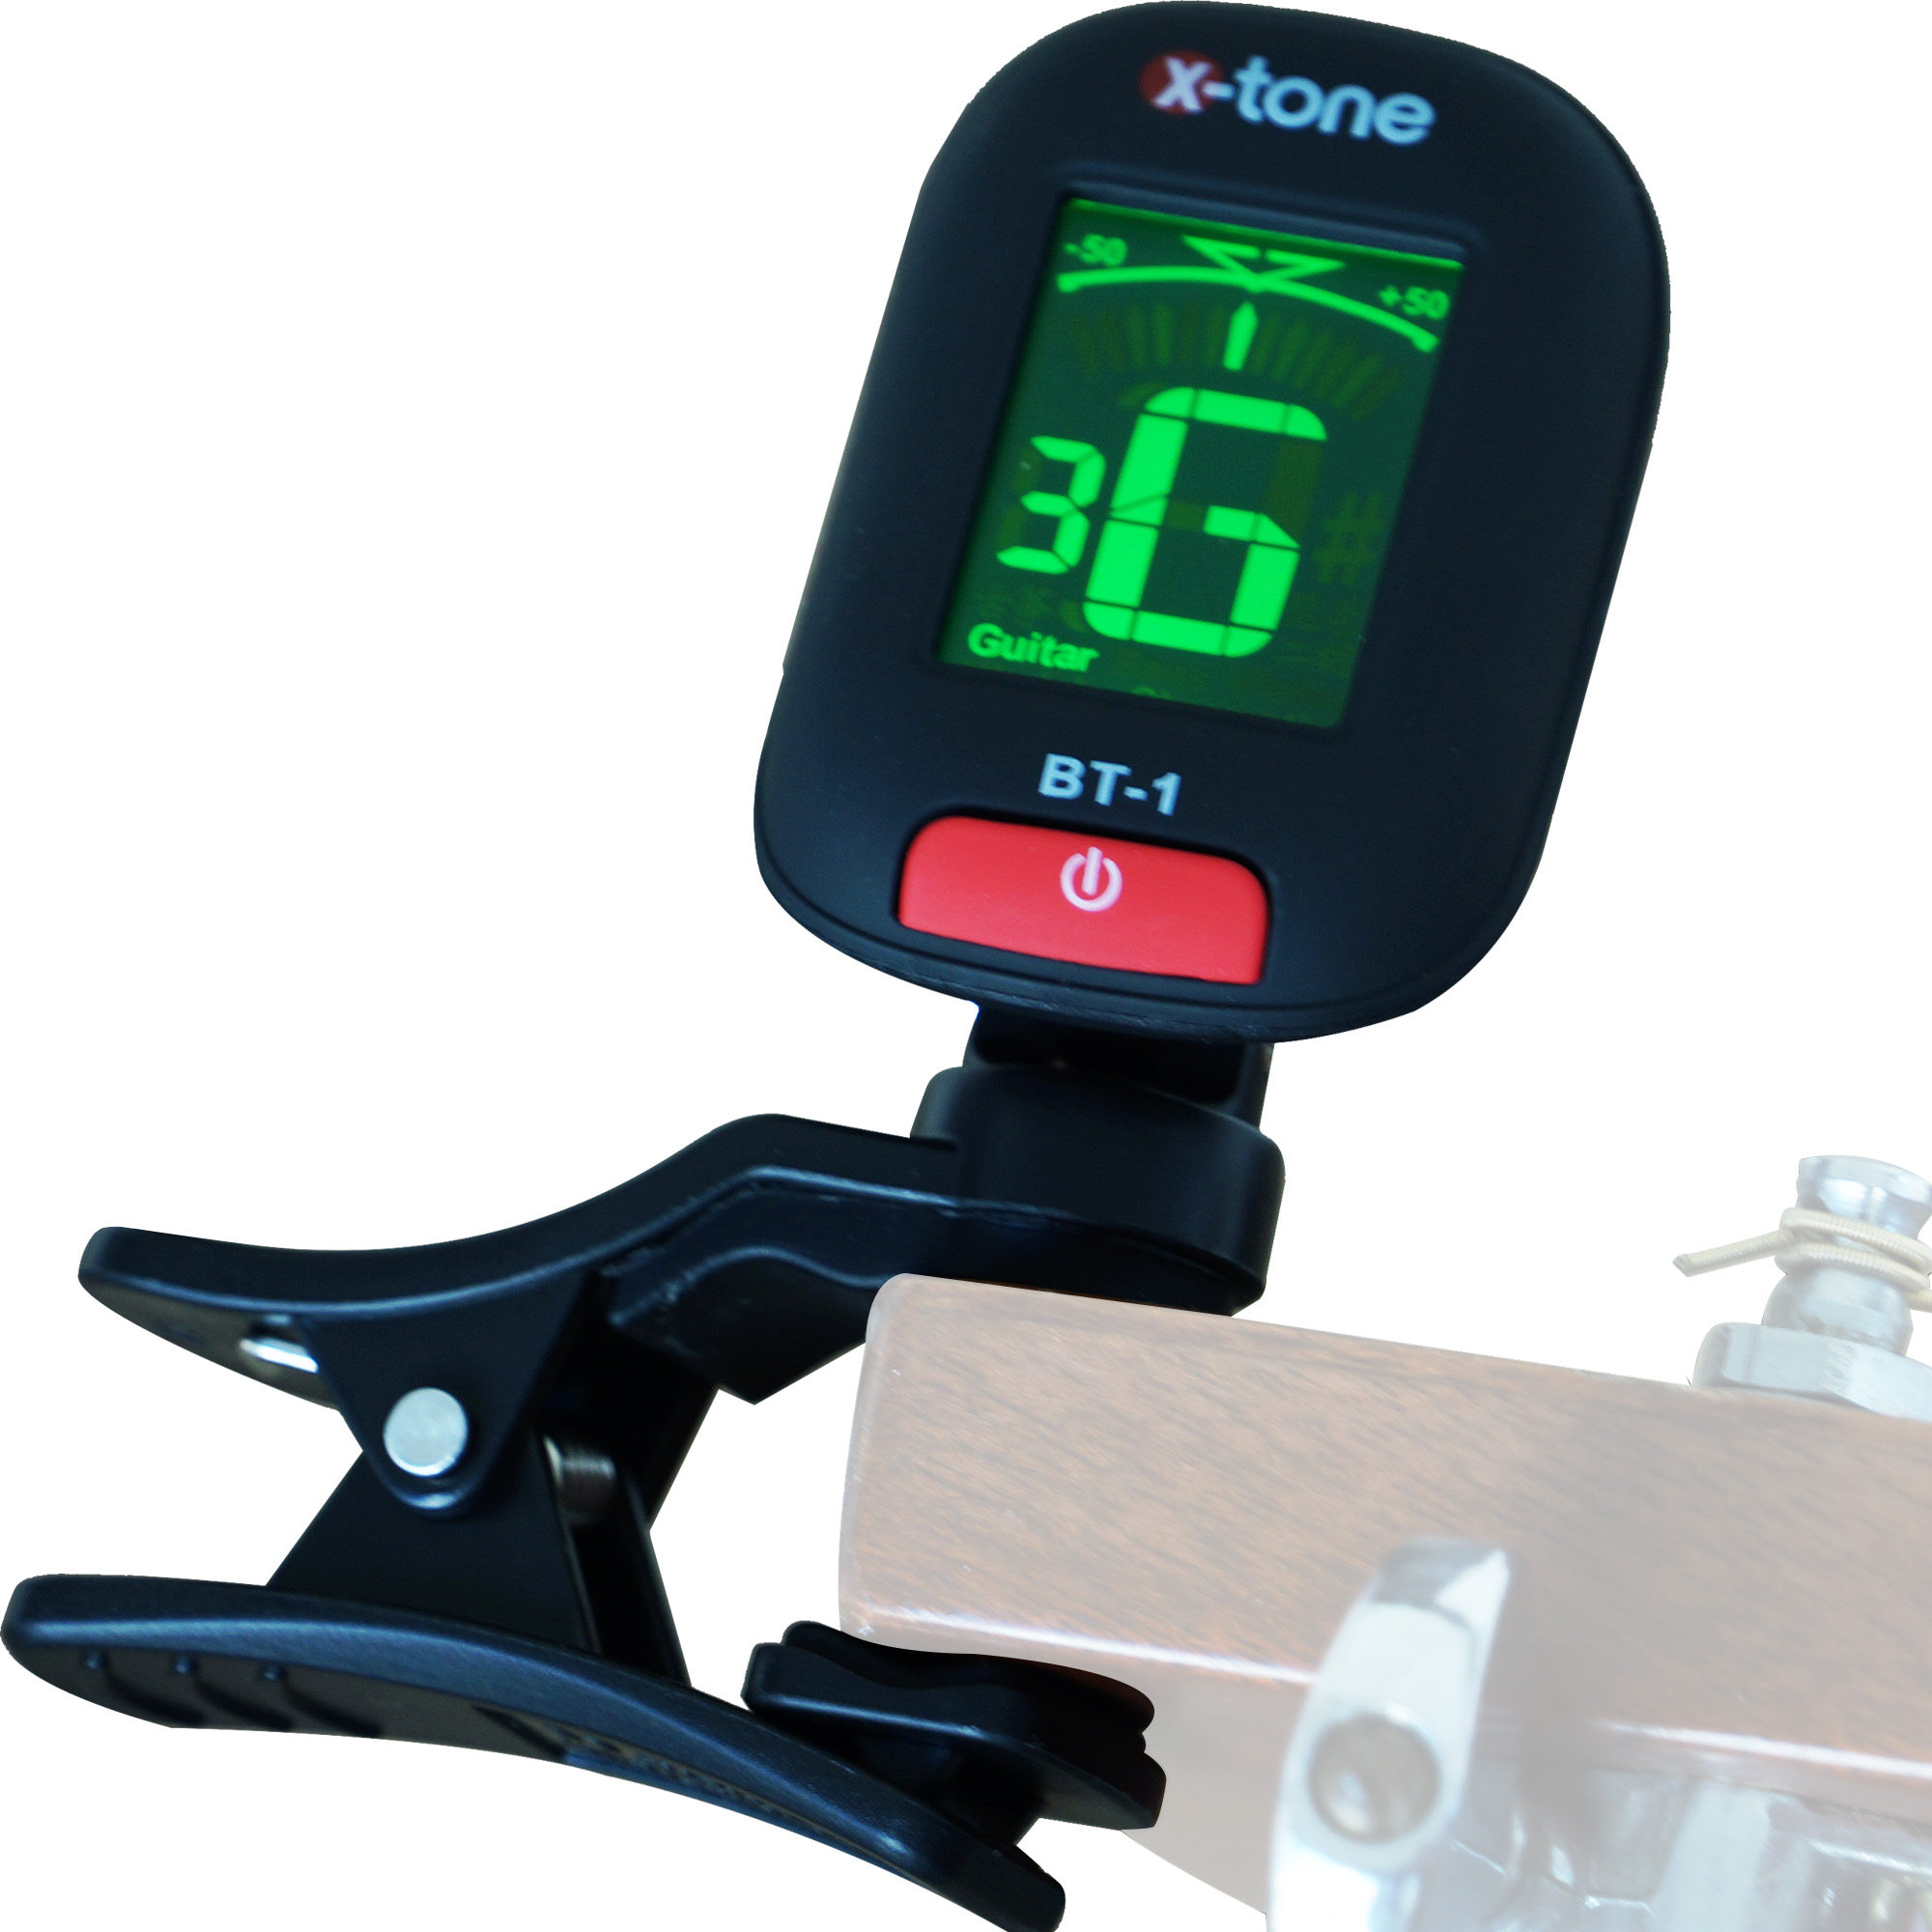 X-tone 3110 Clip-on Tuner Pince - Guitar tuner - Variation 1